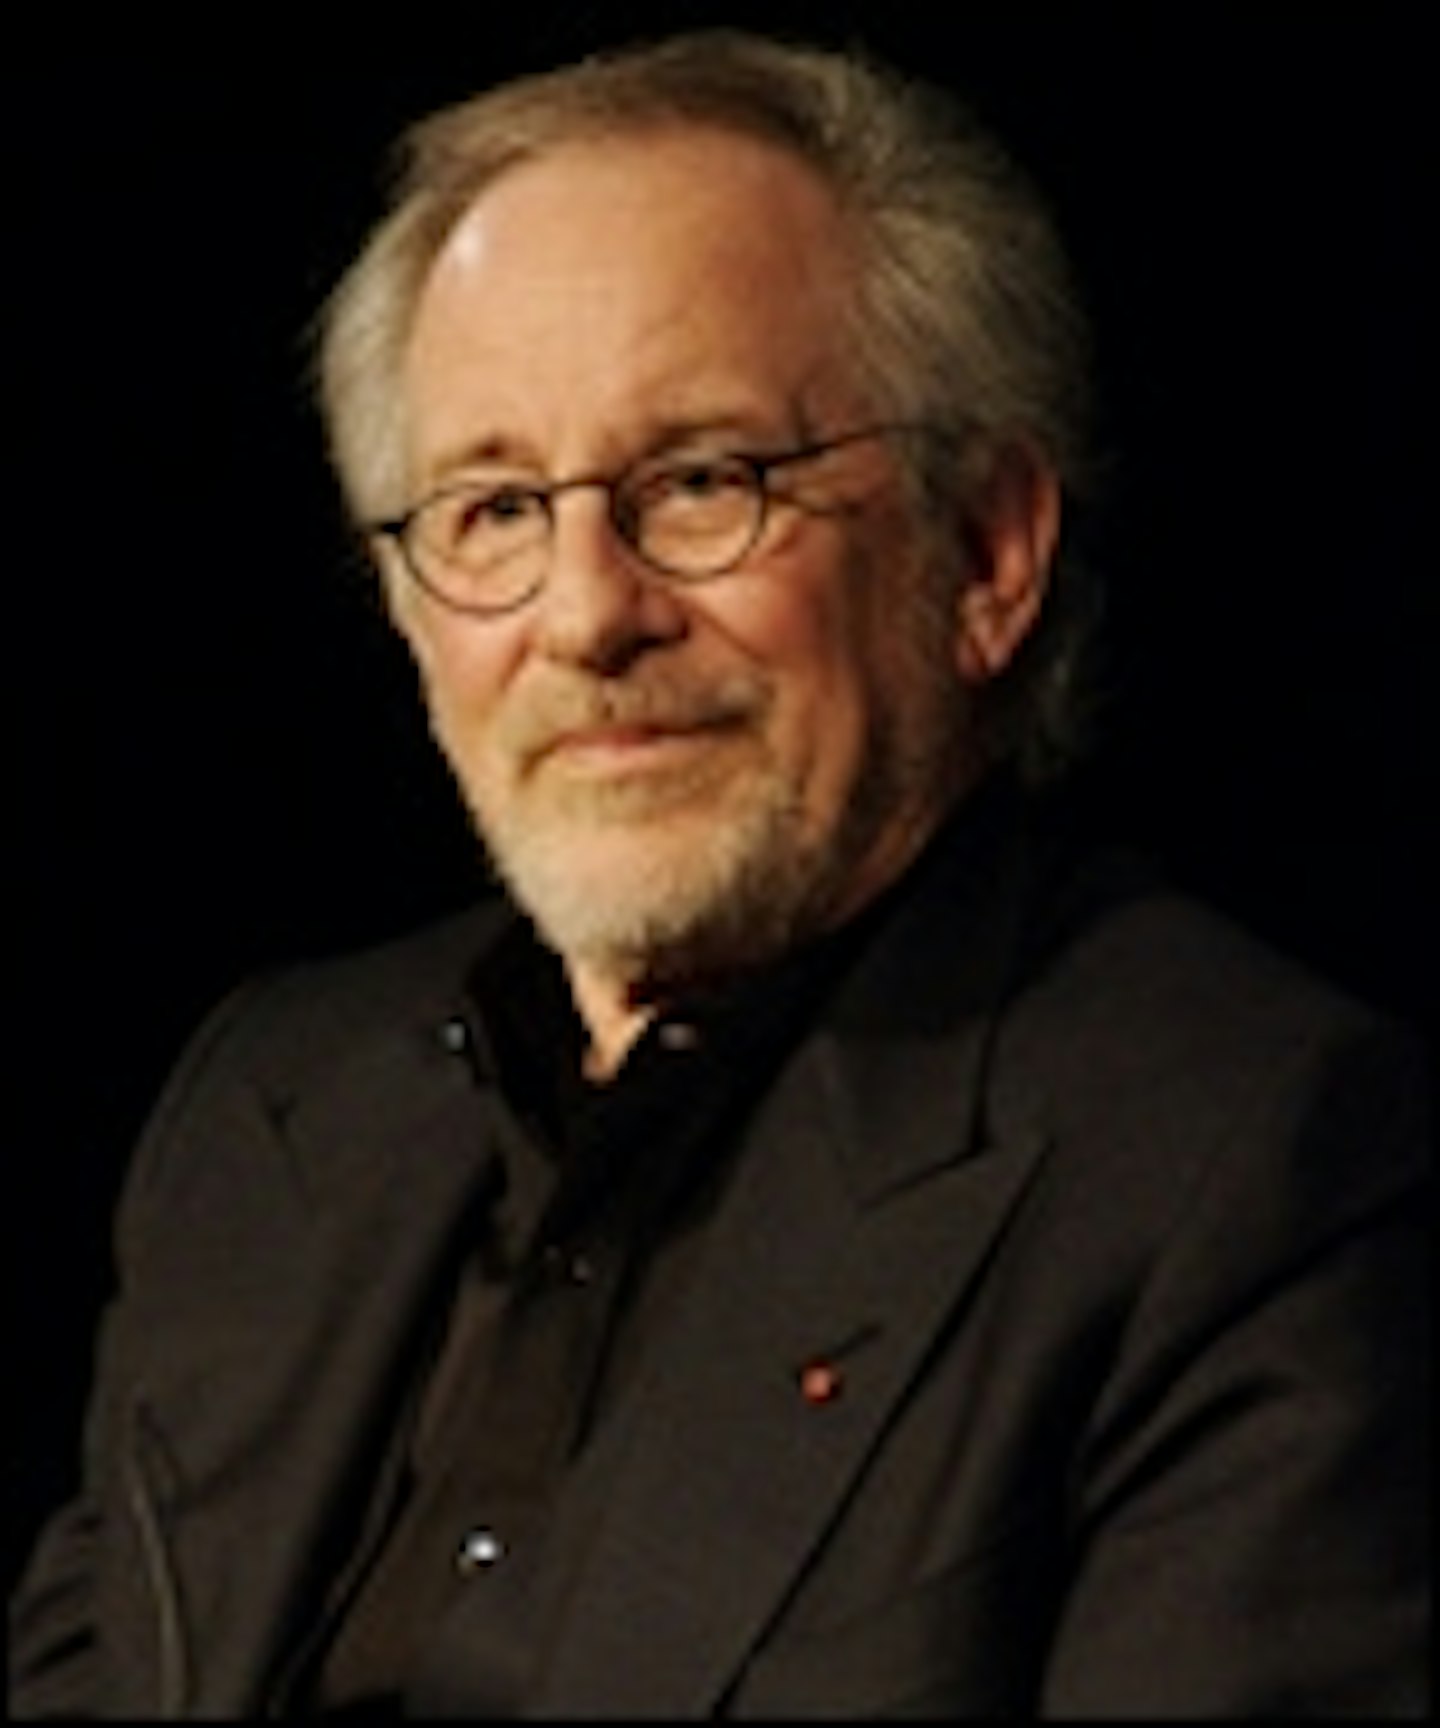 Steven Spielberg Confirms Ready Player One